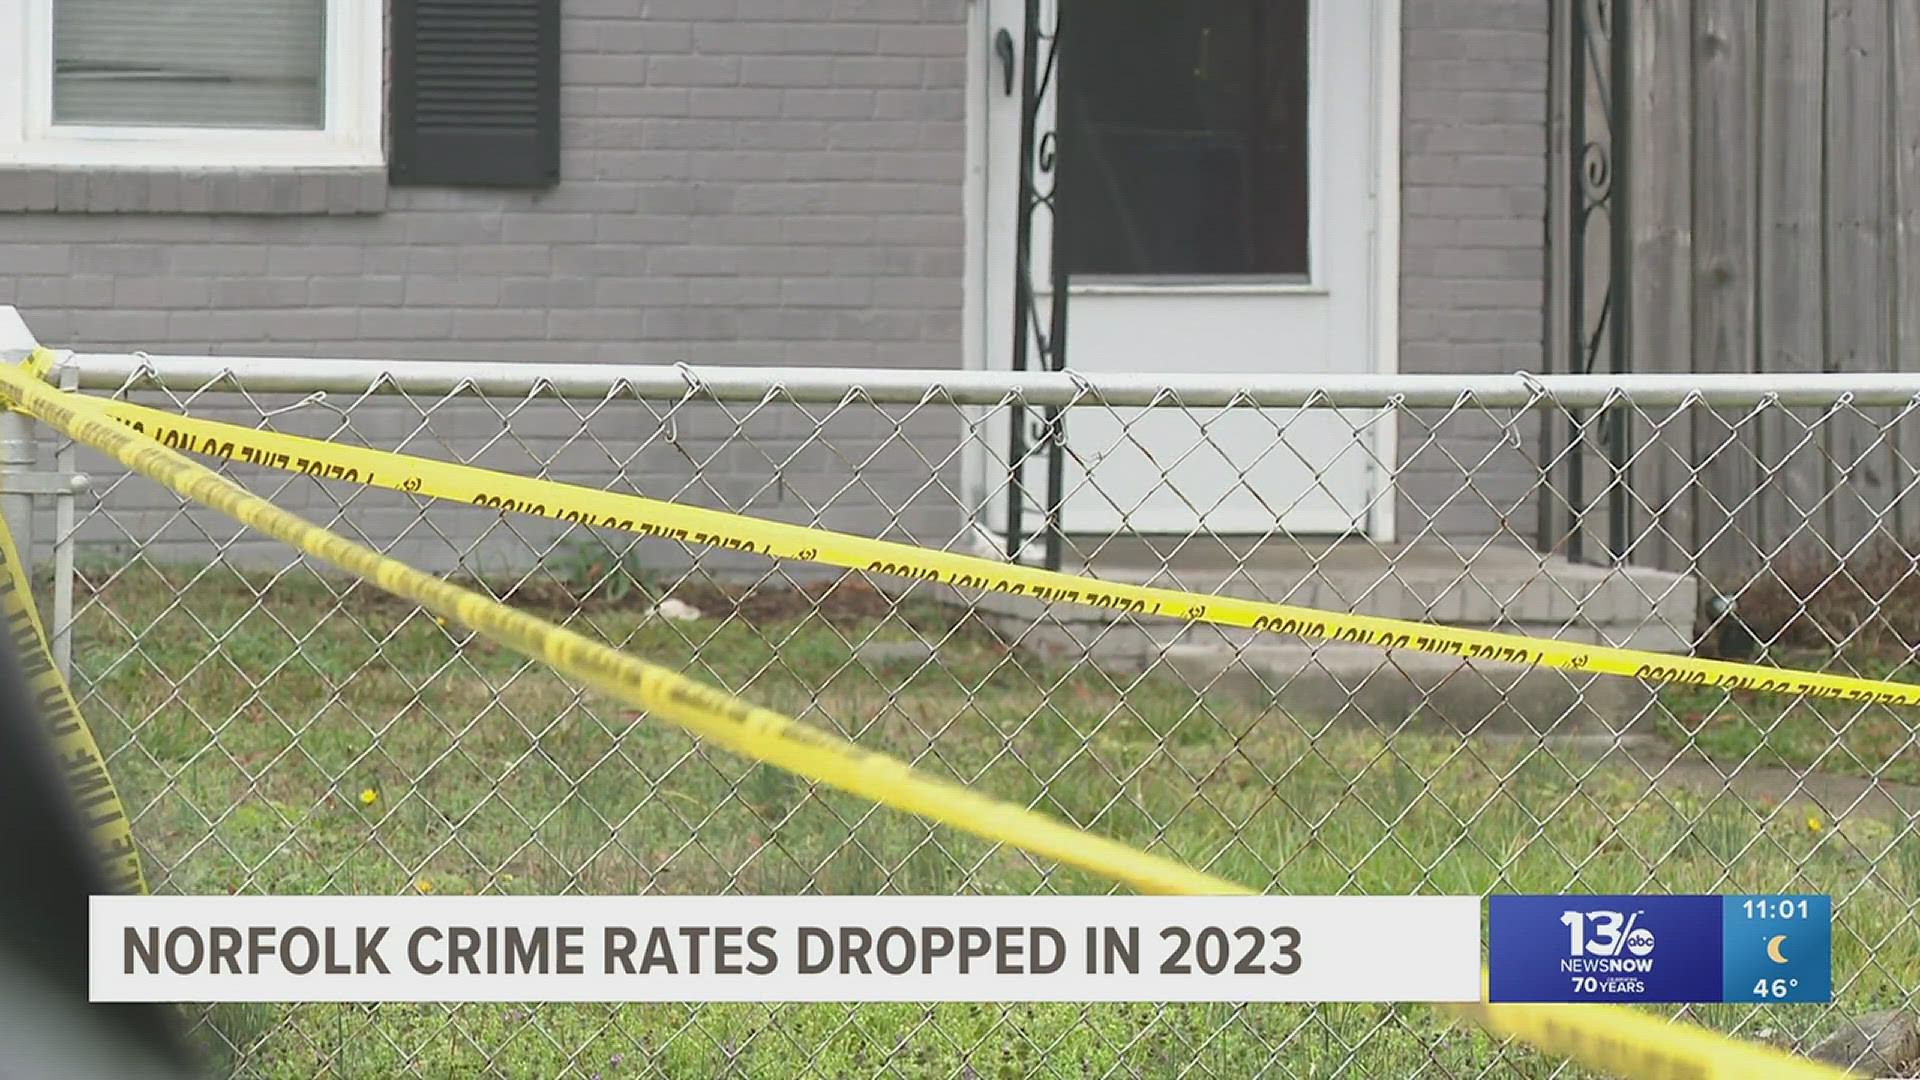 Norfolk Commonwealth’s Attorney Ramin Fatehi said crime across the city fell by 24% in 2023 compared to the year before.